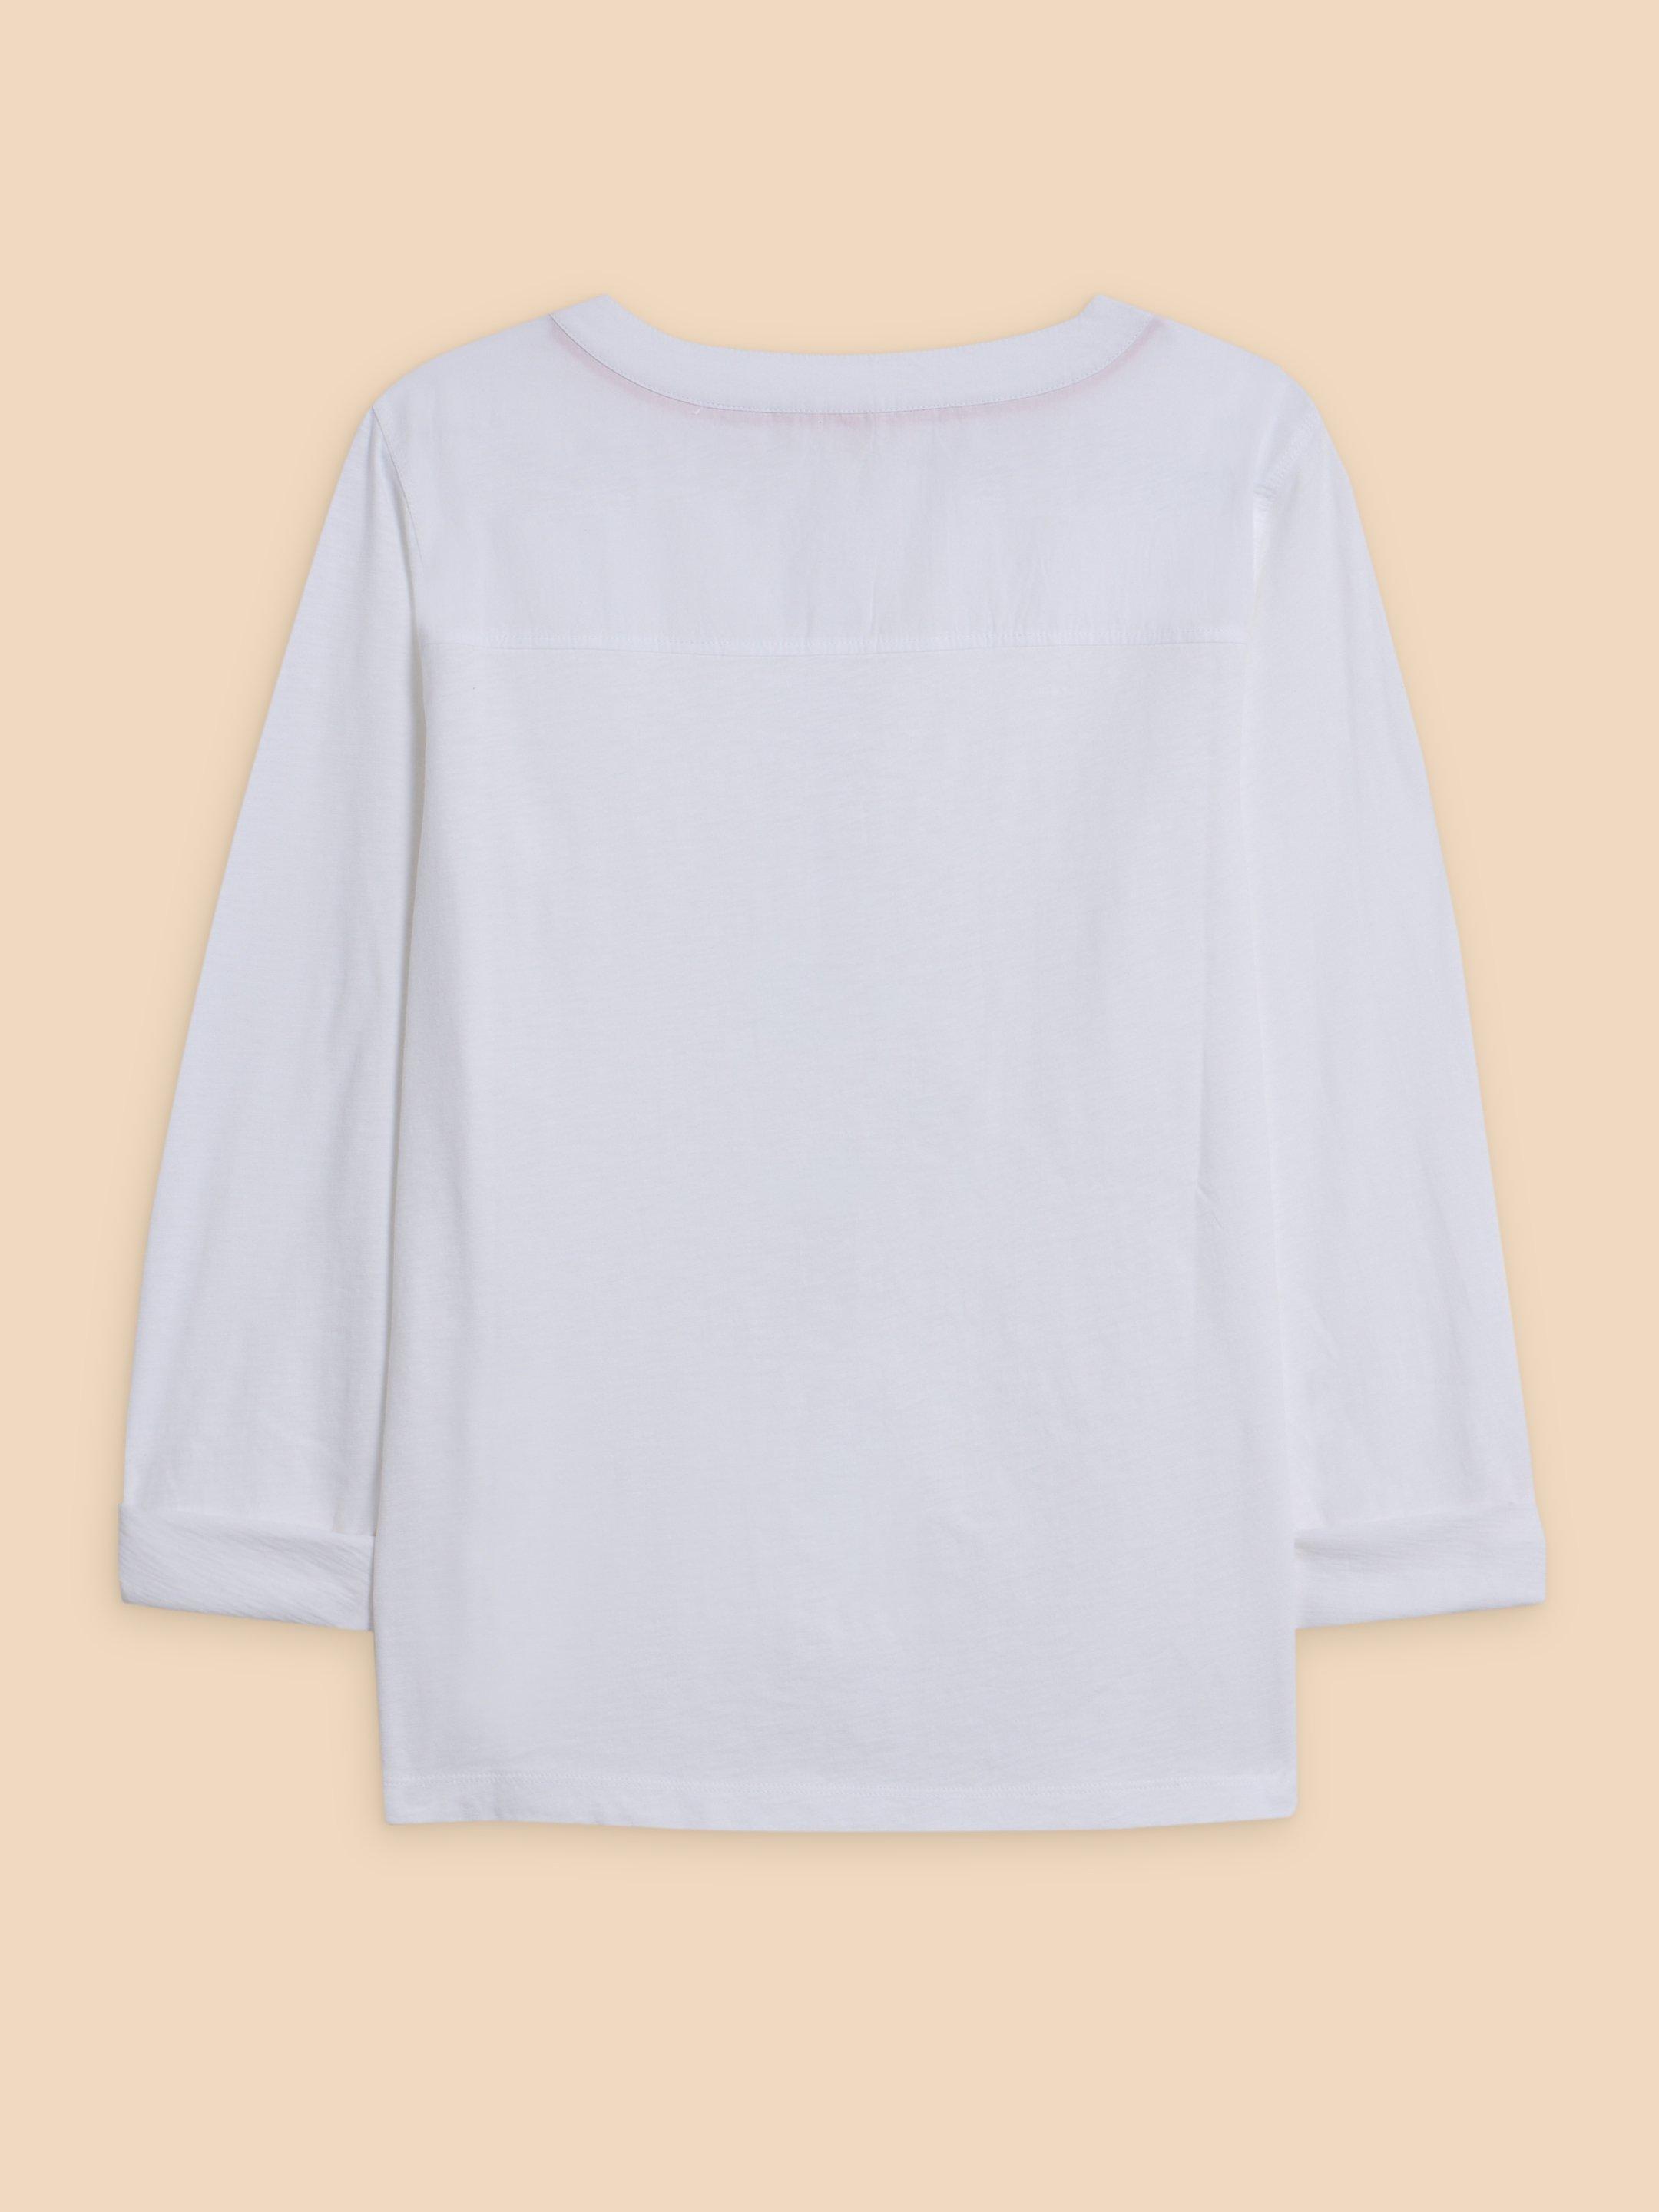 MACLEY MIX SHIRT in PALE IVORY - FLAT BACK